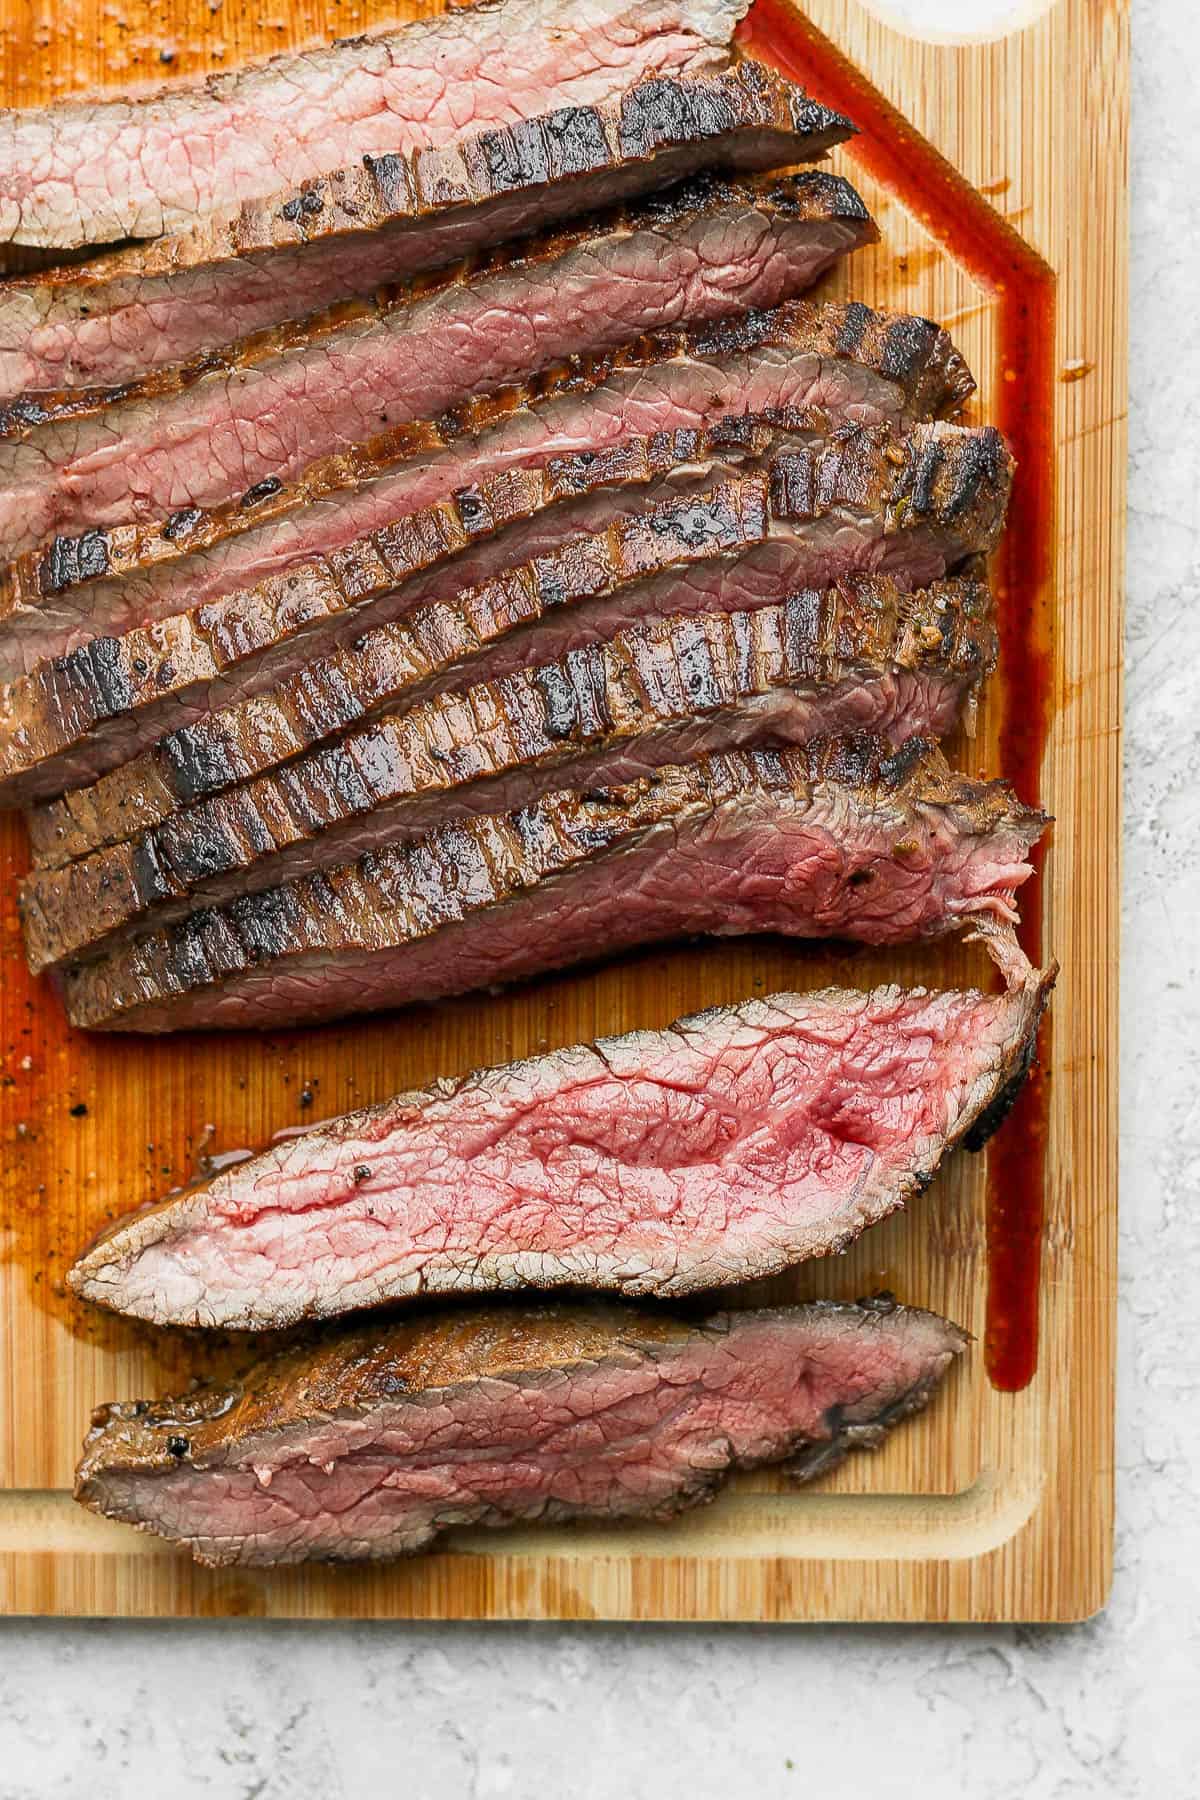 Marinated and cooked flank steak on a cutting board.